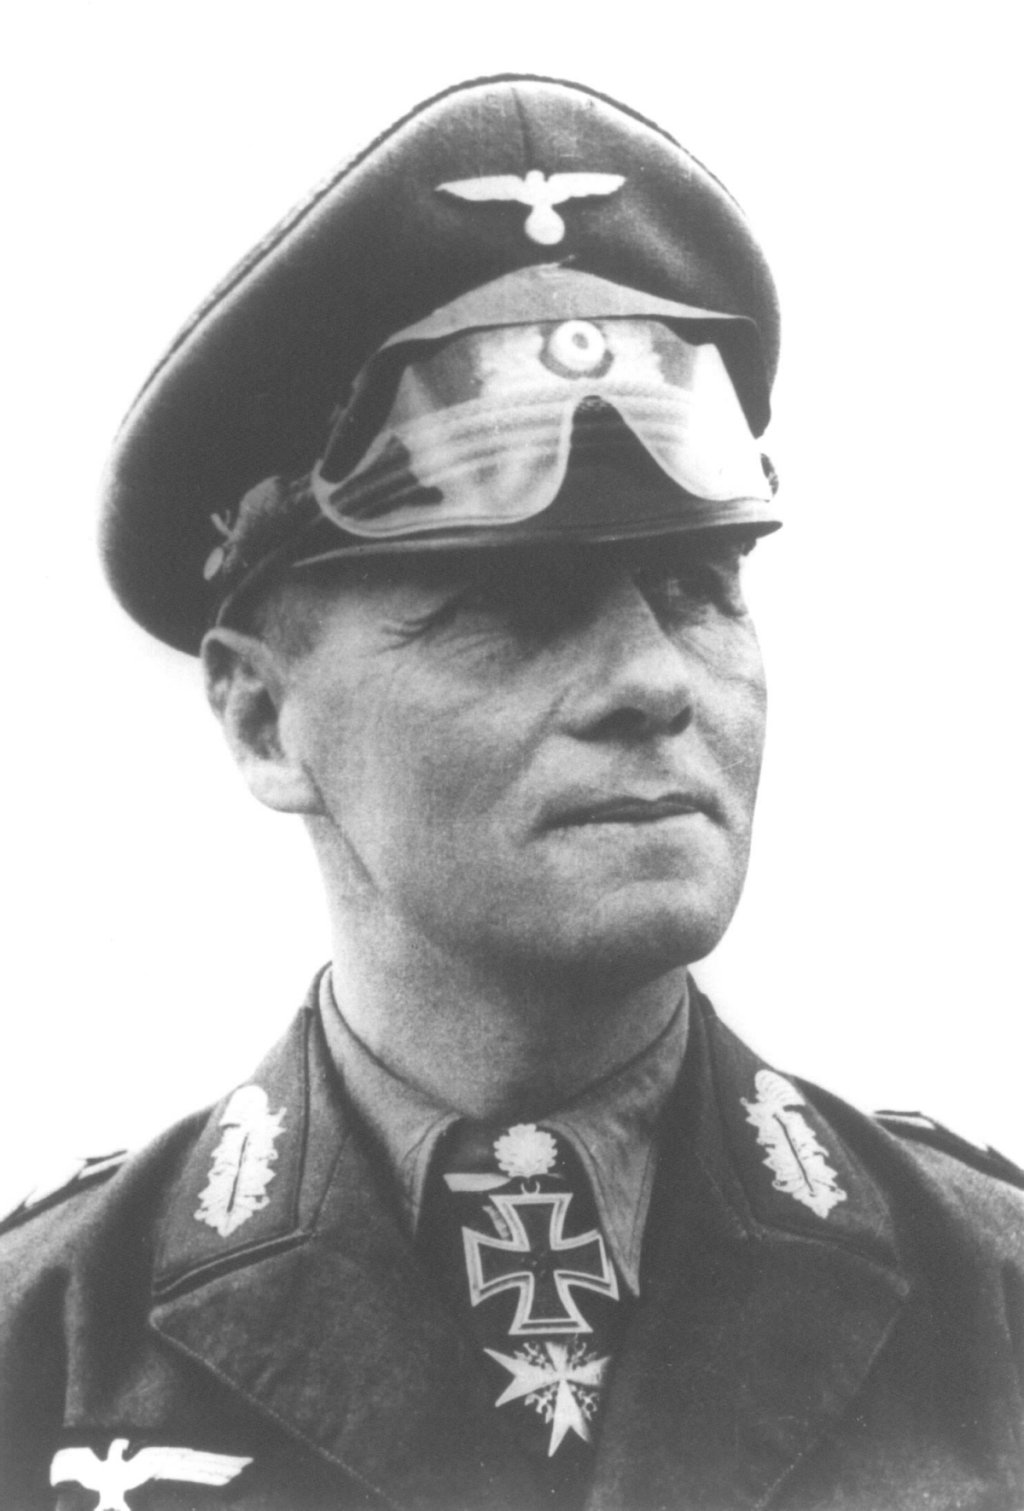 Portrait of Erwin Rommel, circa 1941-1942; note Knight's Cross and Pour le Mérite medals